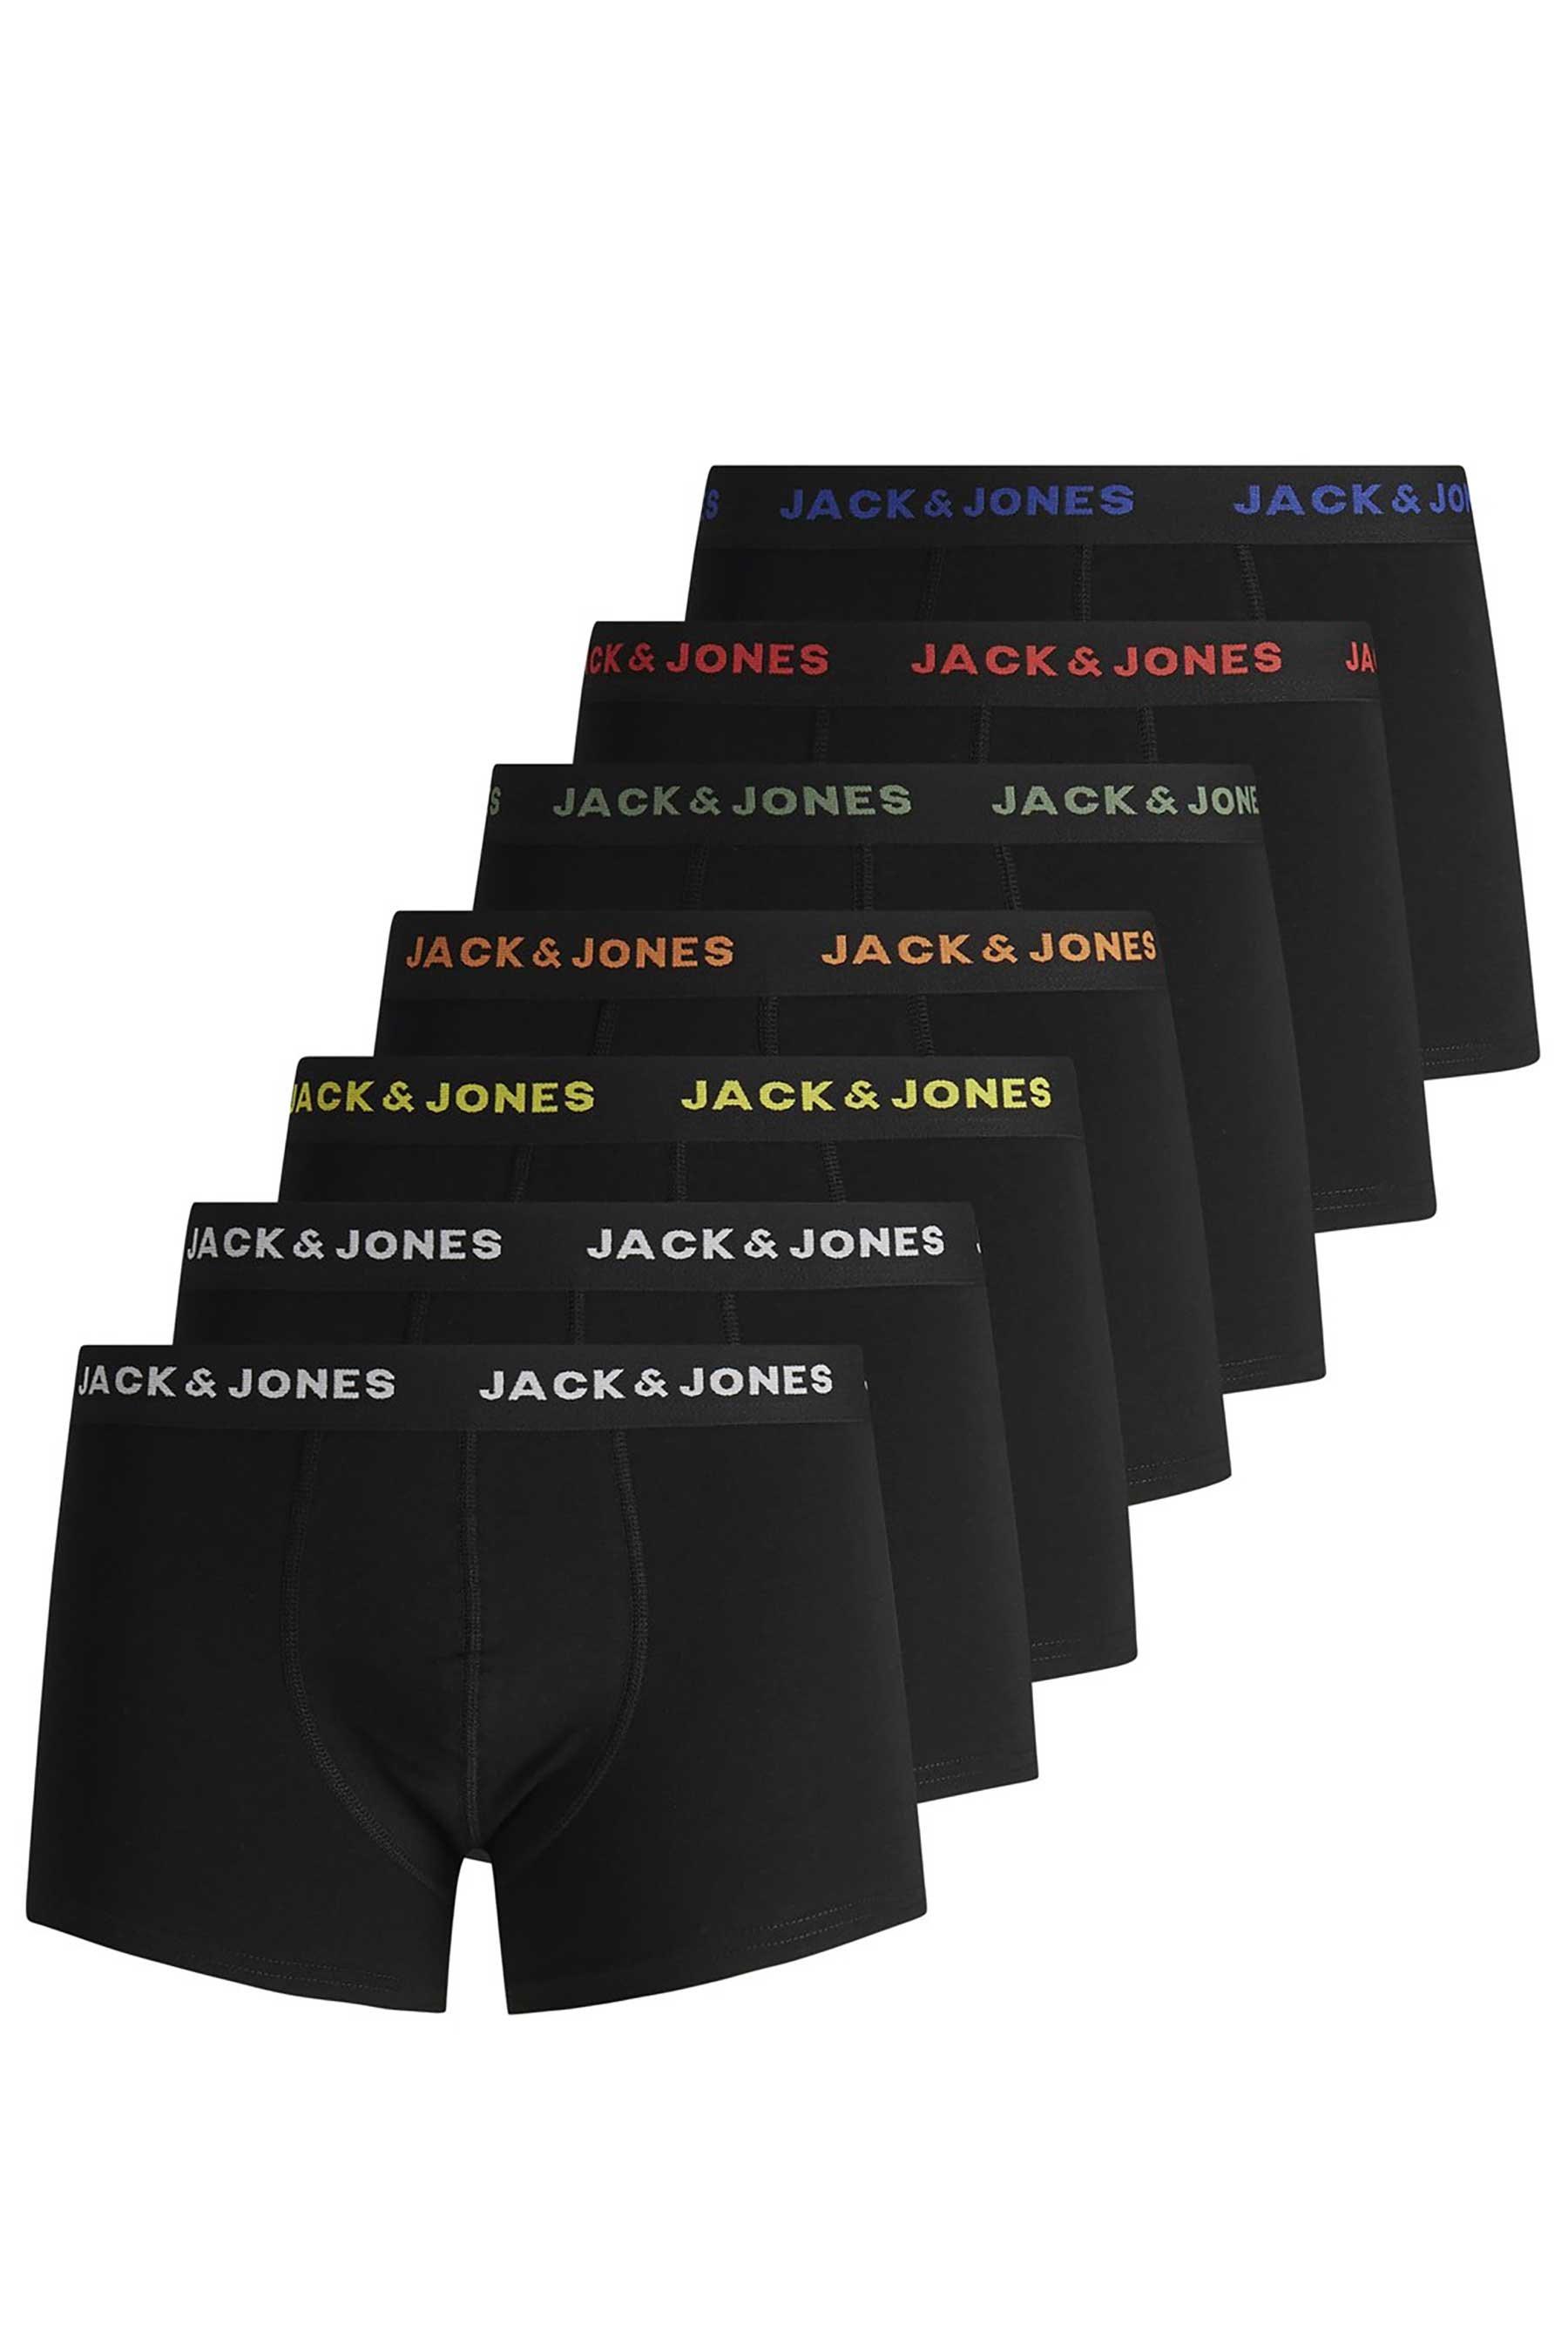 pack of 7 jack and jones essential colourband trunks - mens - black - size: small